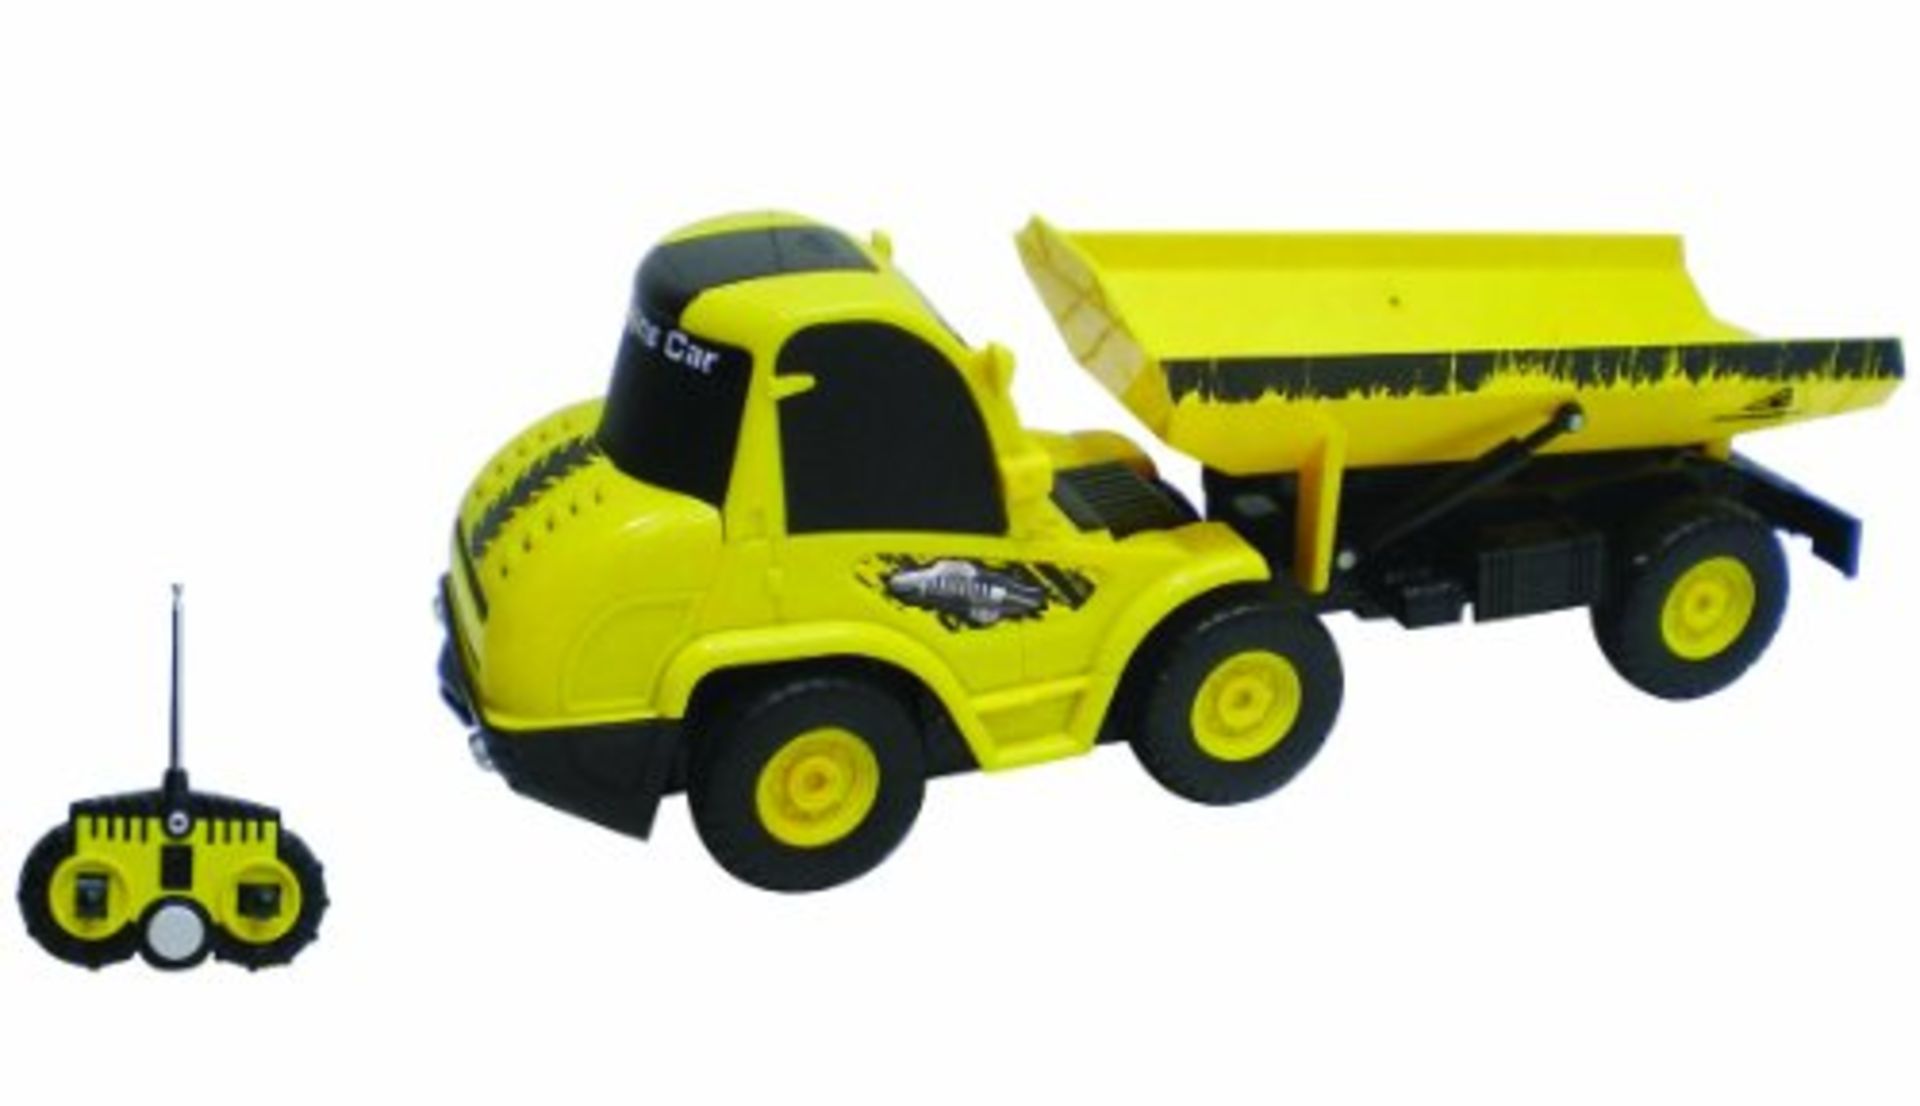 V Brand New 1:20 Fully Functional R/C Construction Tipper Vehicle